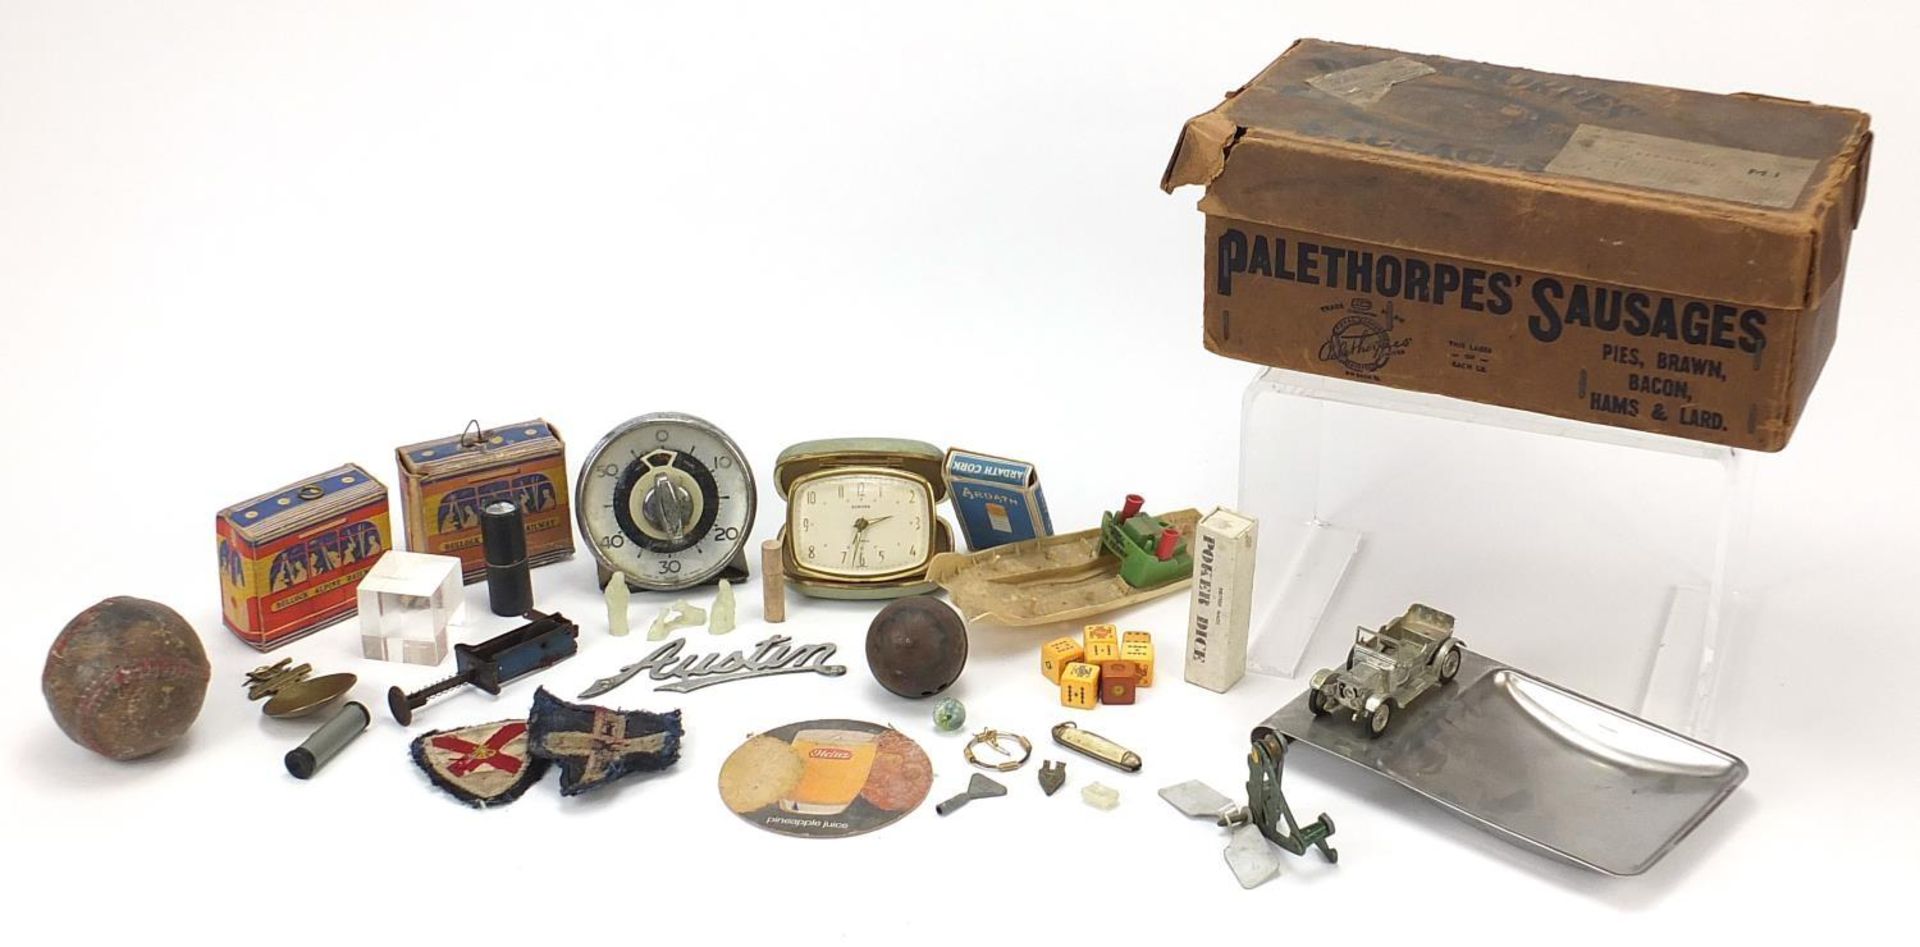 Objects including an advertising Palethorpes Sausage box and Smith's clock